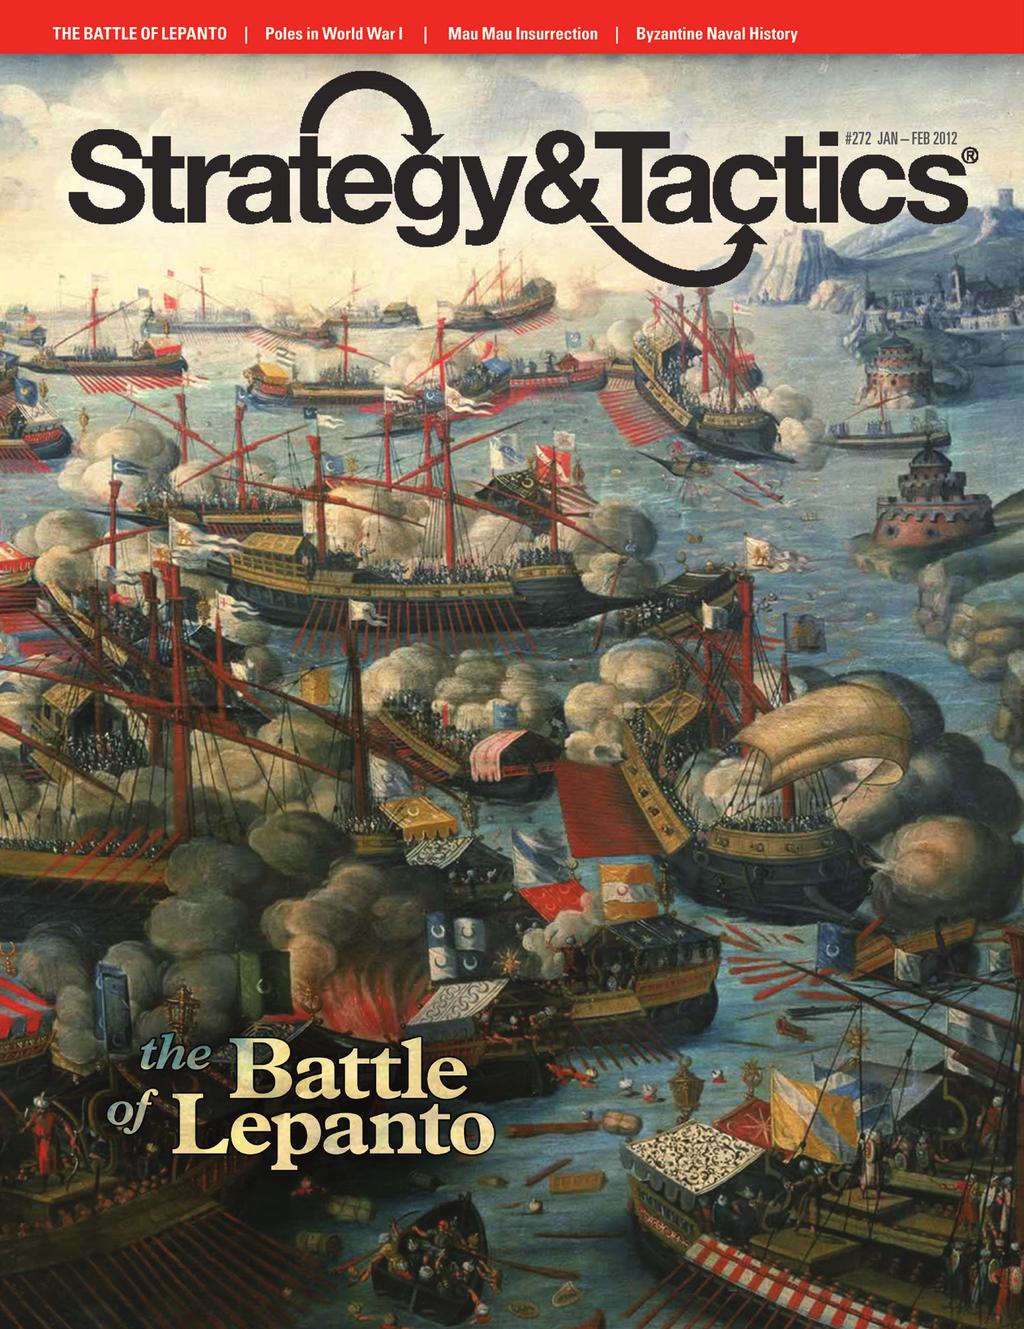 The Battle of Lepanto remain intact. (They were cut loose too soon from their tow ropes historically.) Though the wind is blowing directly into the Ottoman fleet, those ships can still move one hex.